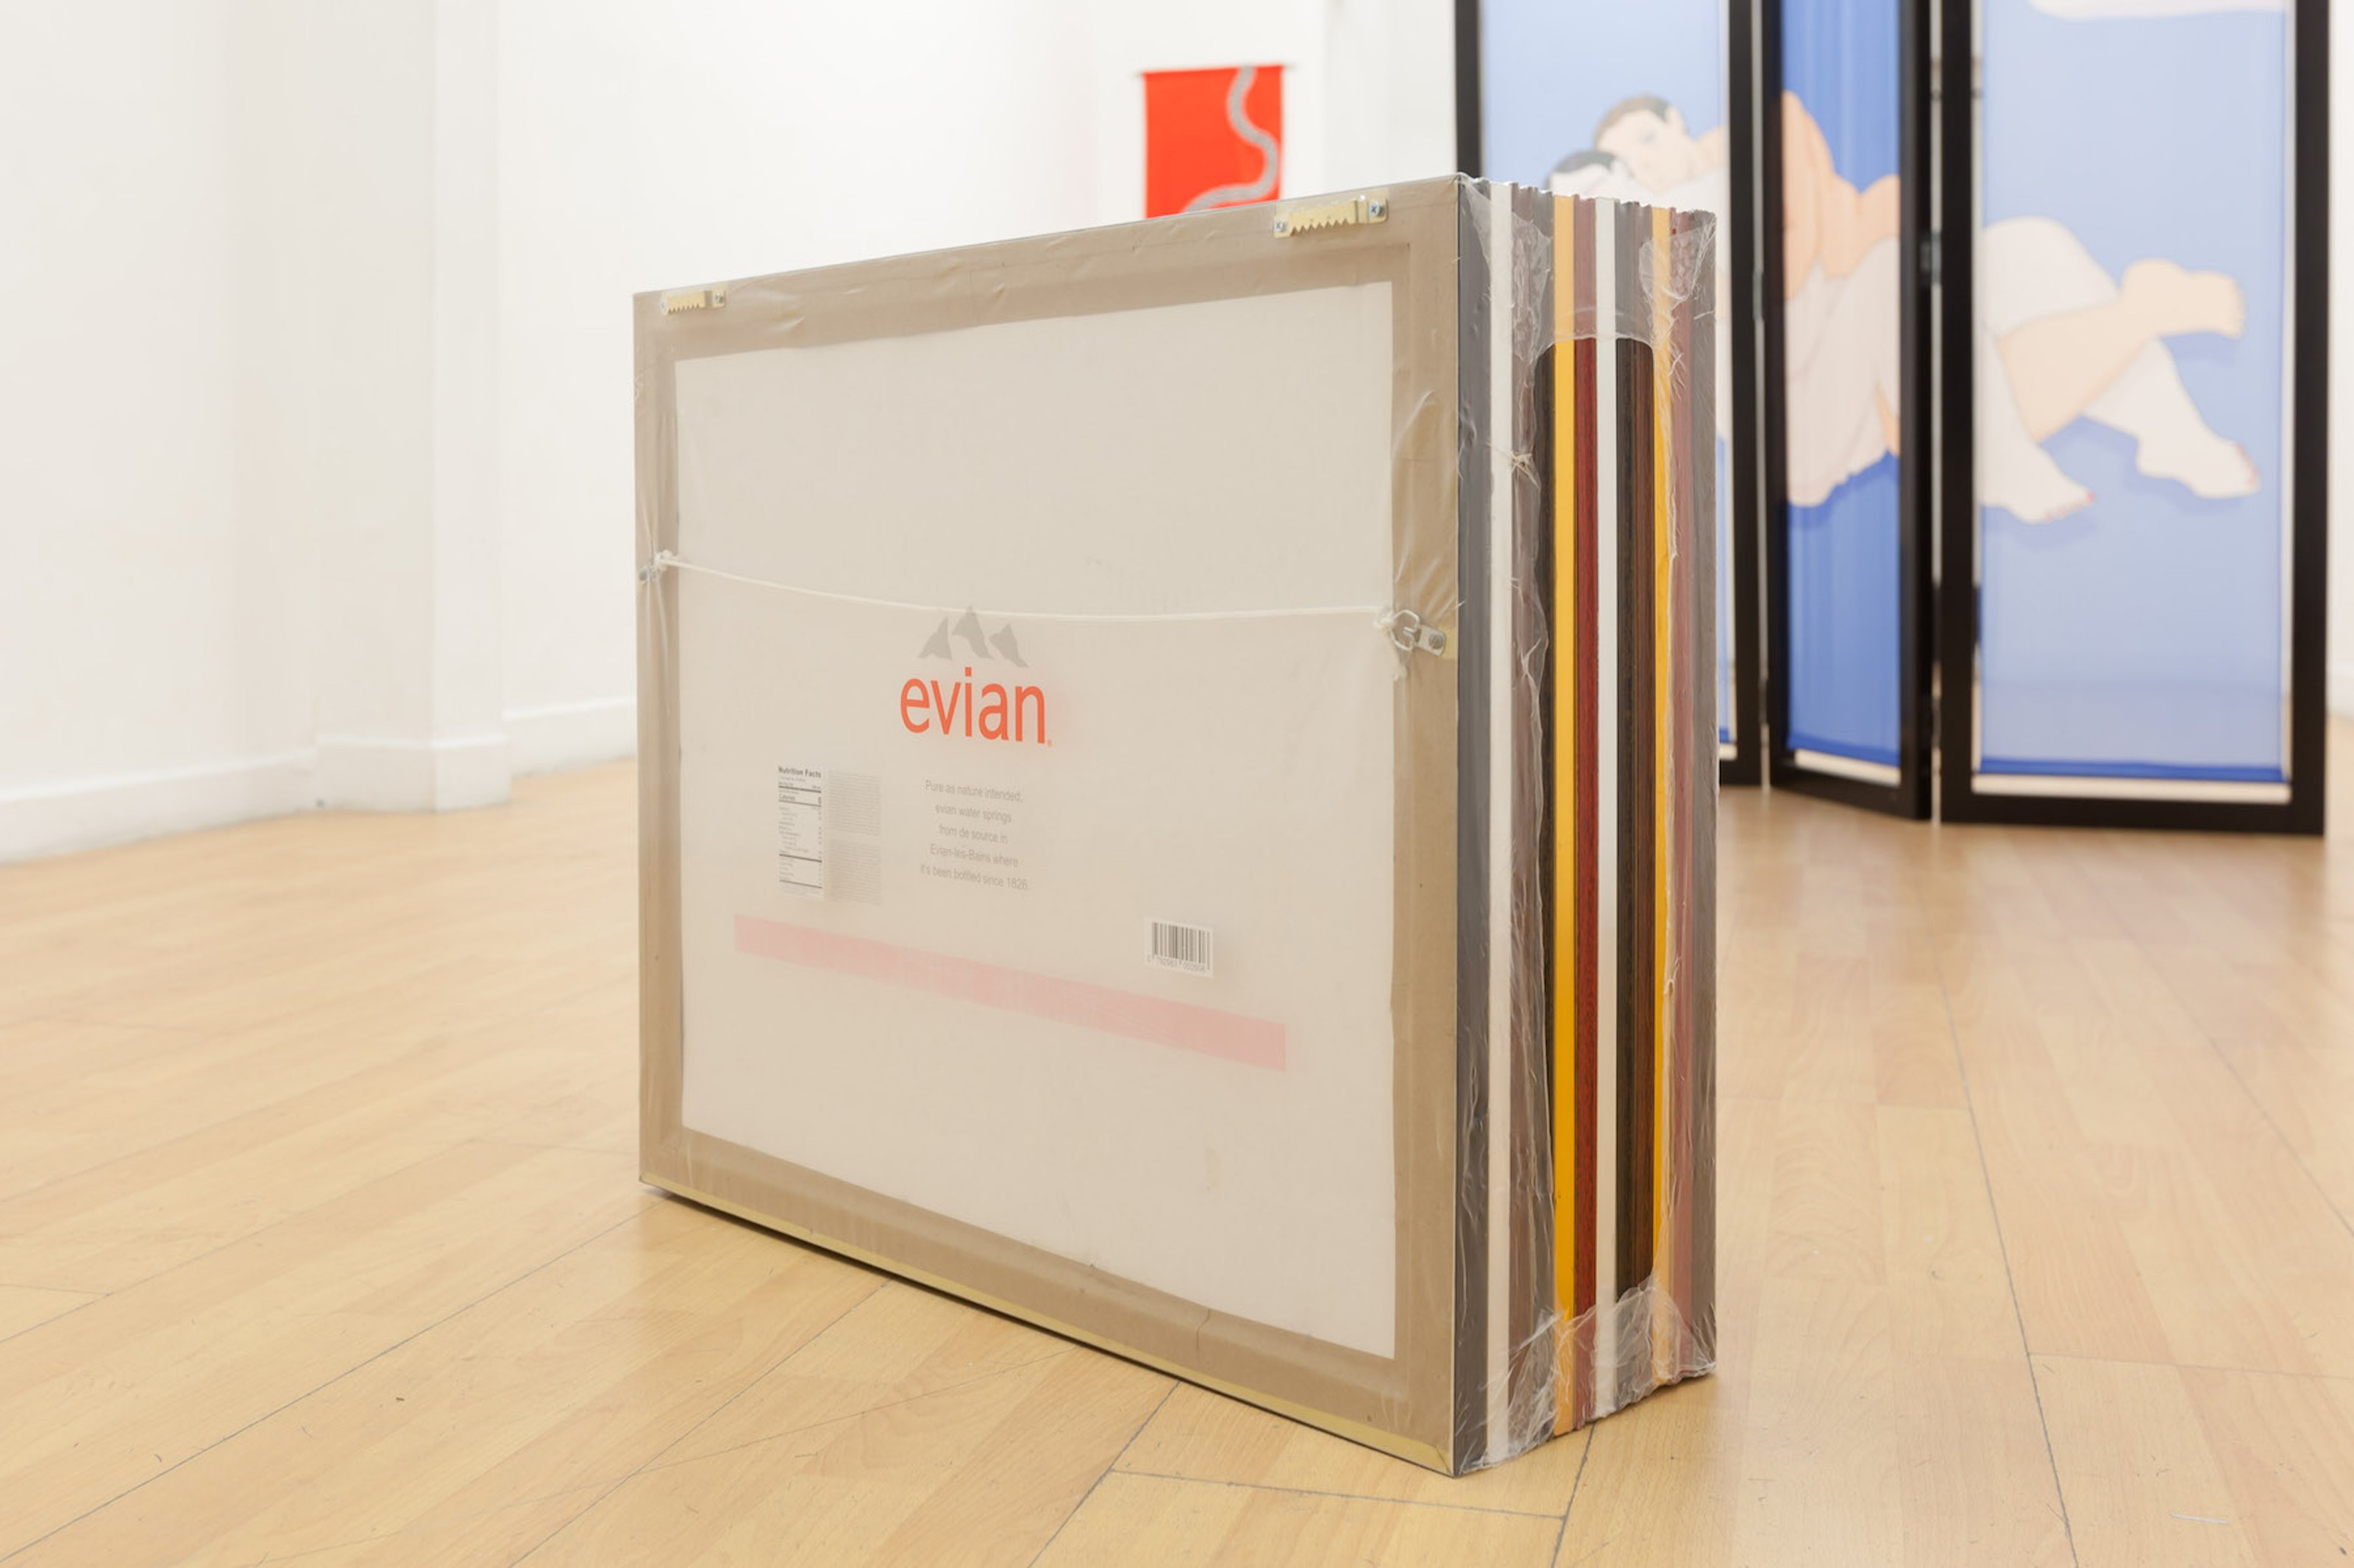 12 frames wrapped in plastic, Evian logo on the plastic wrapper